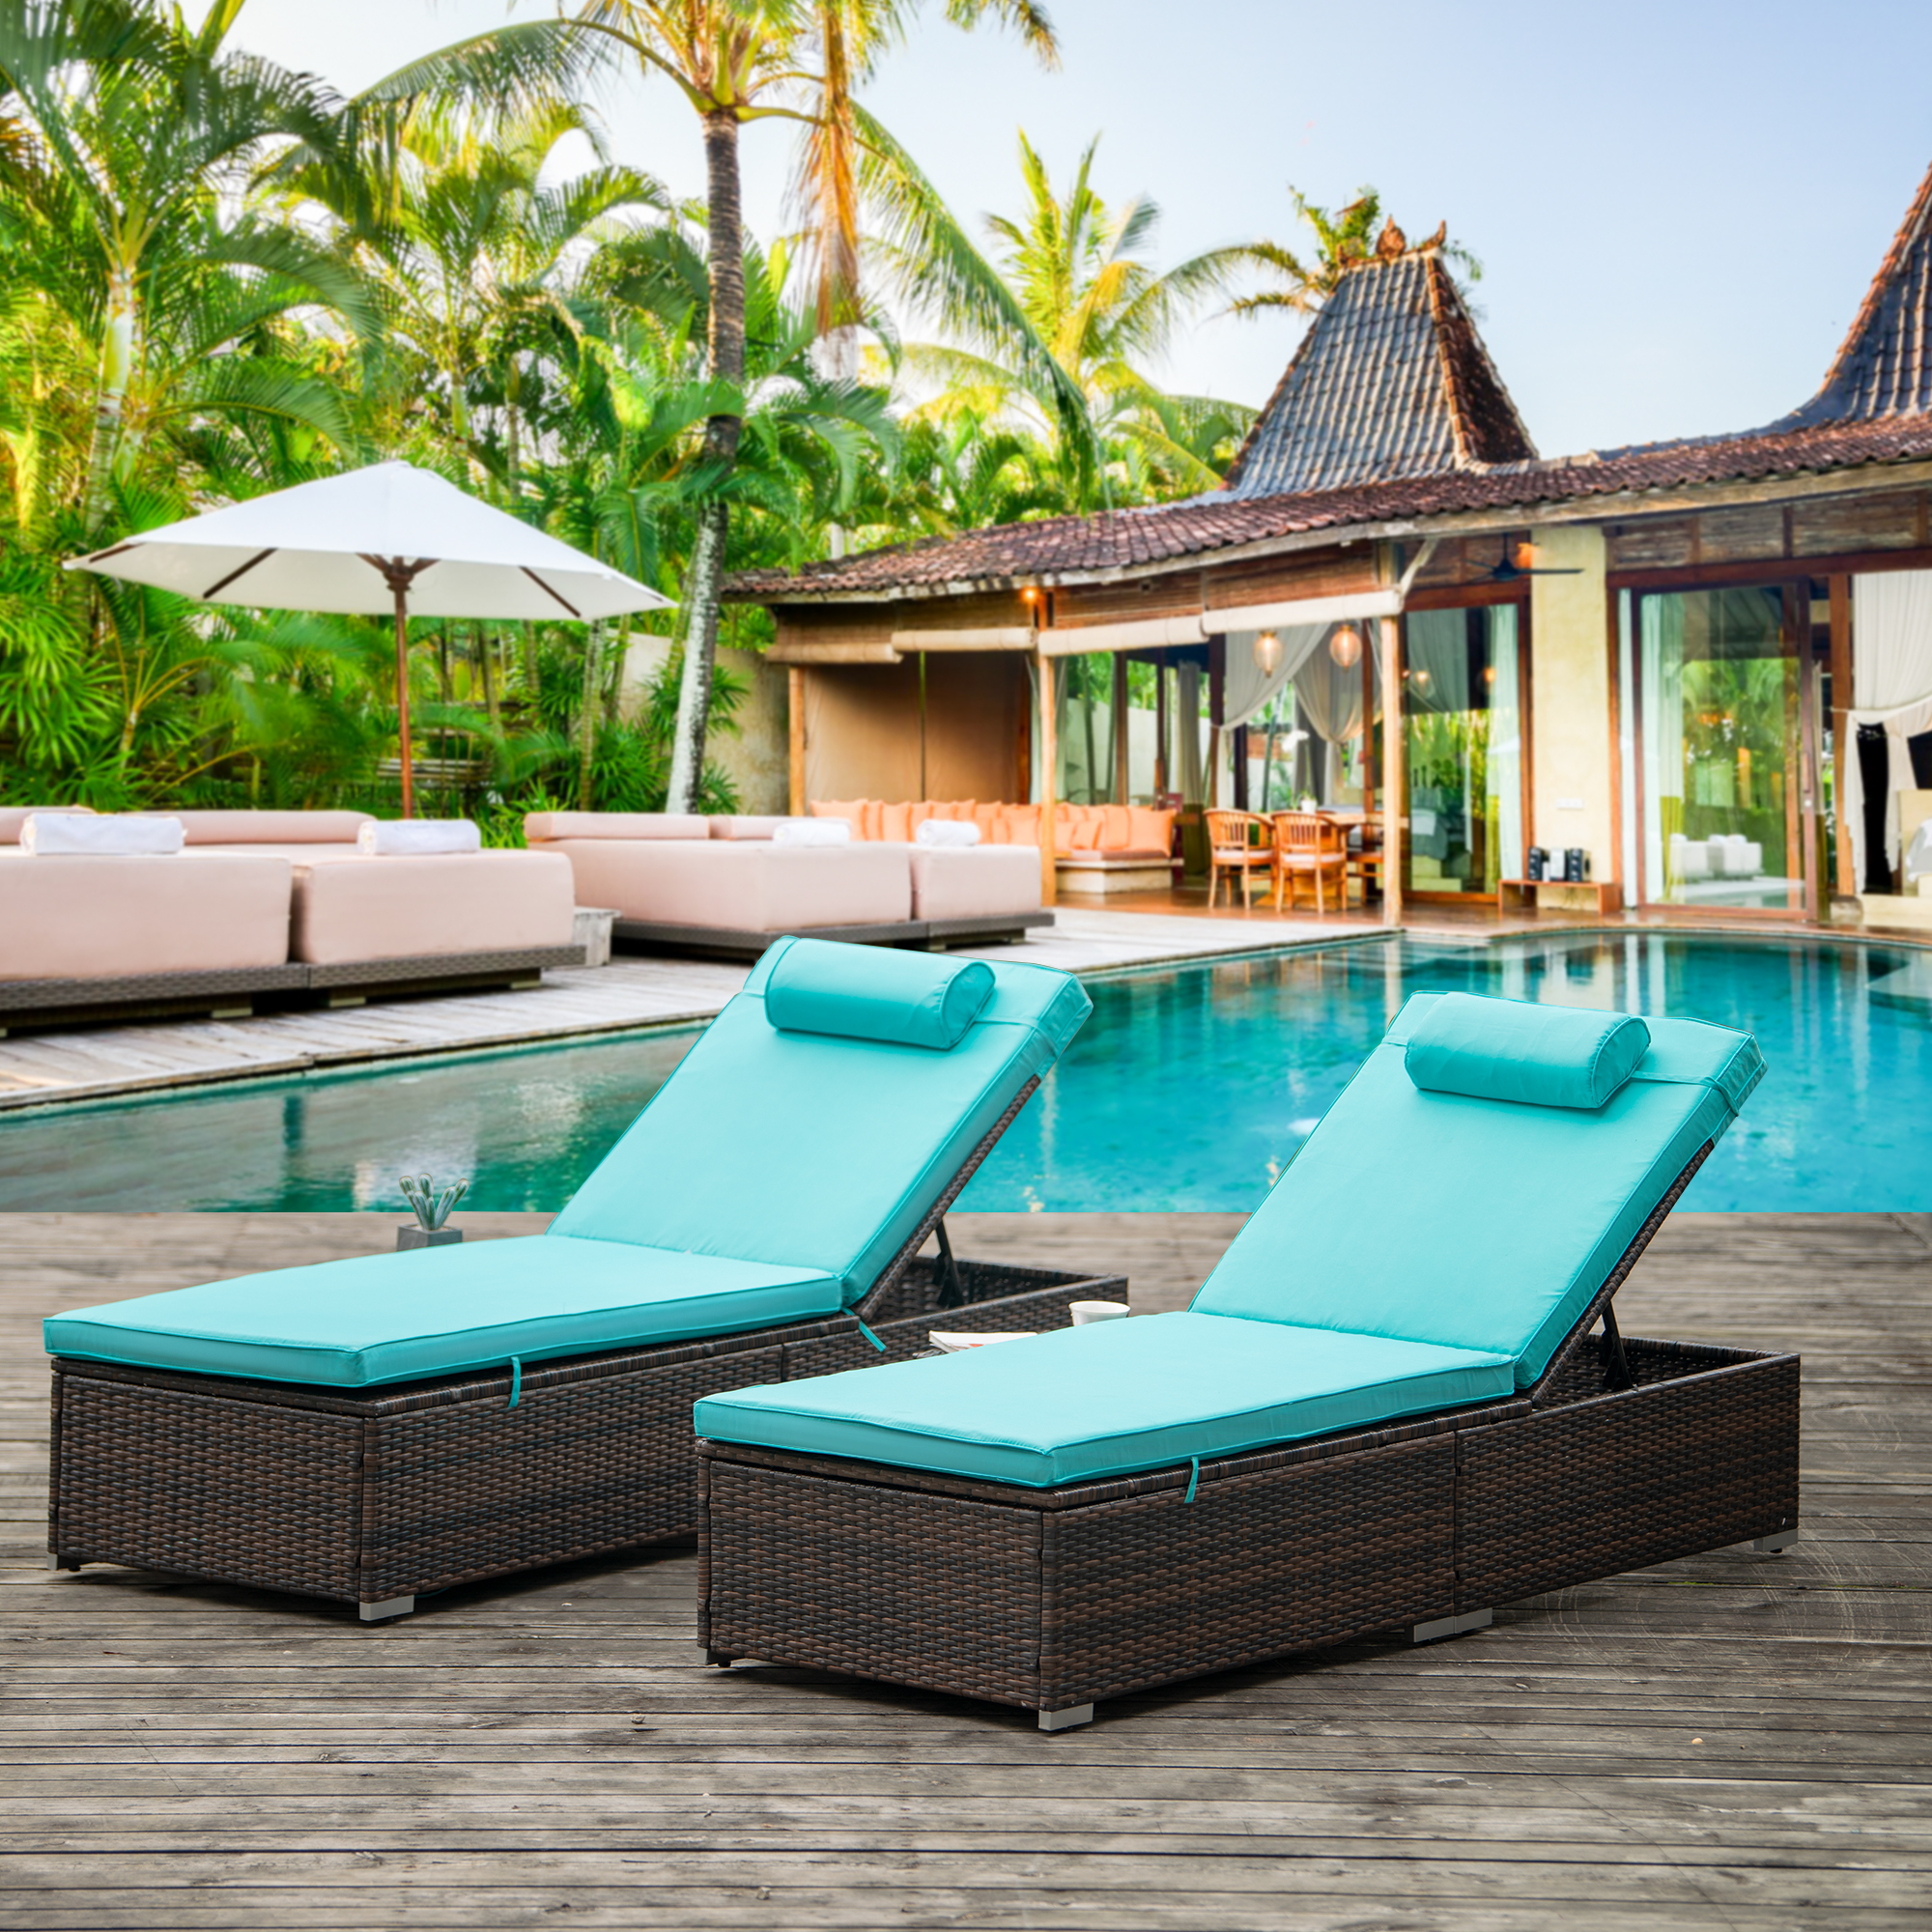 Chaise Lounge Chairs for Outside 2 Pieces, Patio Adjustable Lounge Chairs Set of 2 with Side Table, Outdoor Rattan Wicker Pool Chaise Lounge Chairs Cushioned Poolside Chaise Lounge Set, Blue - image 1 of 10